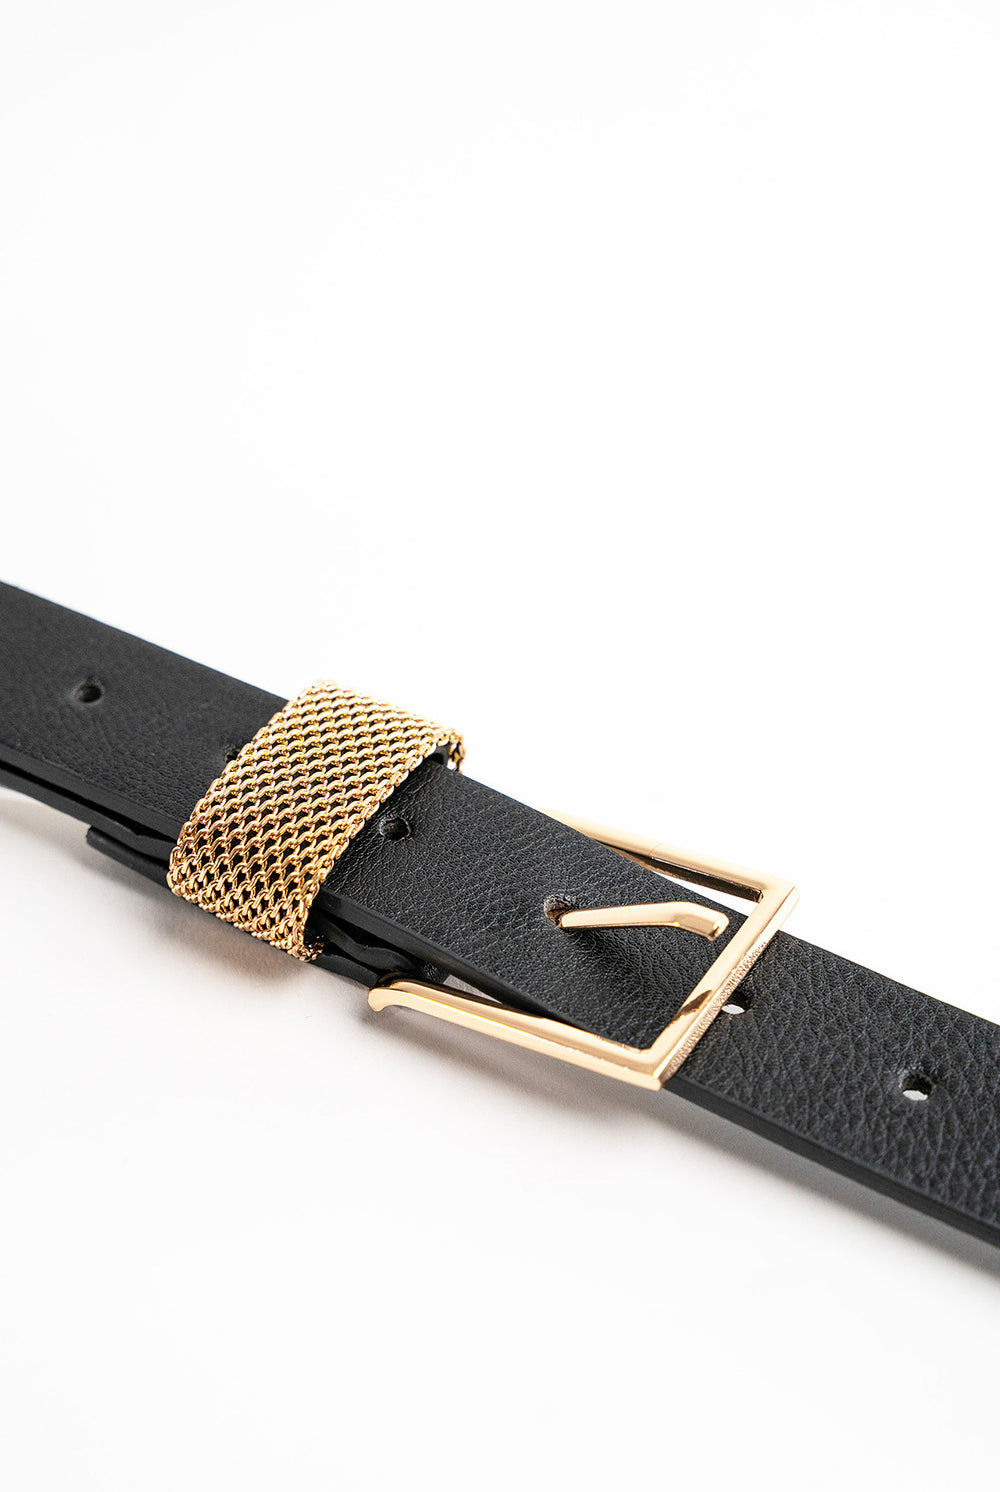 My Accessories London Chainmail Belt in Black and Gold | Belts | Women | Women's | Accessory  | Essential | Casual | Basic | Vegan